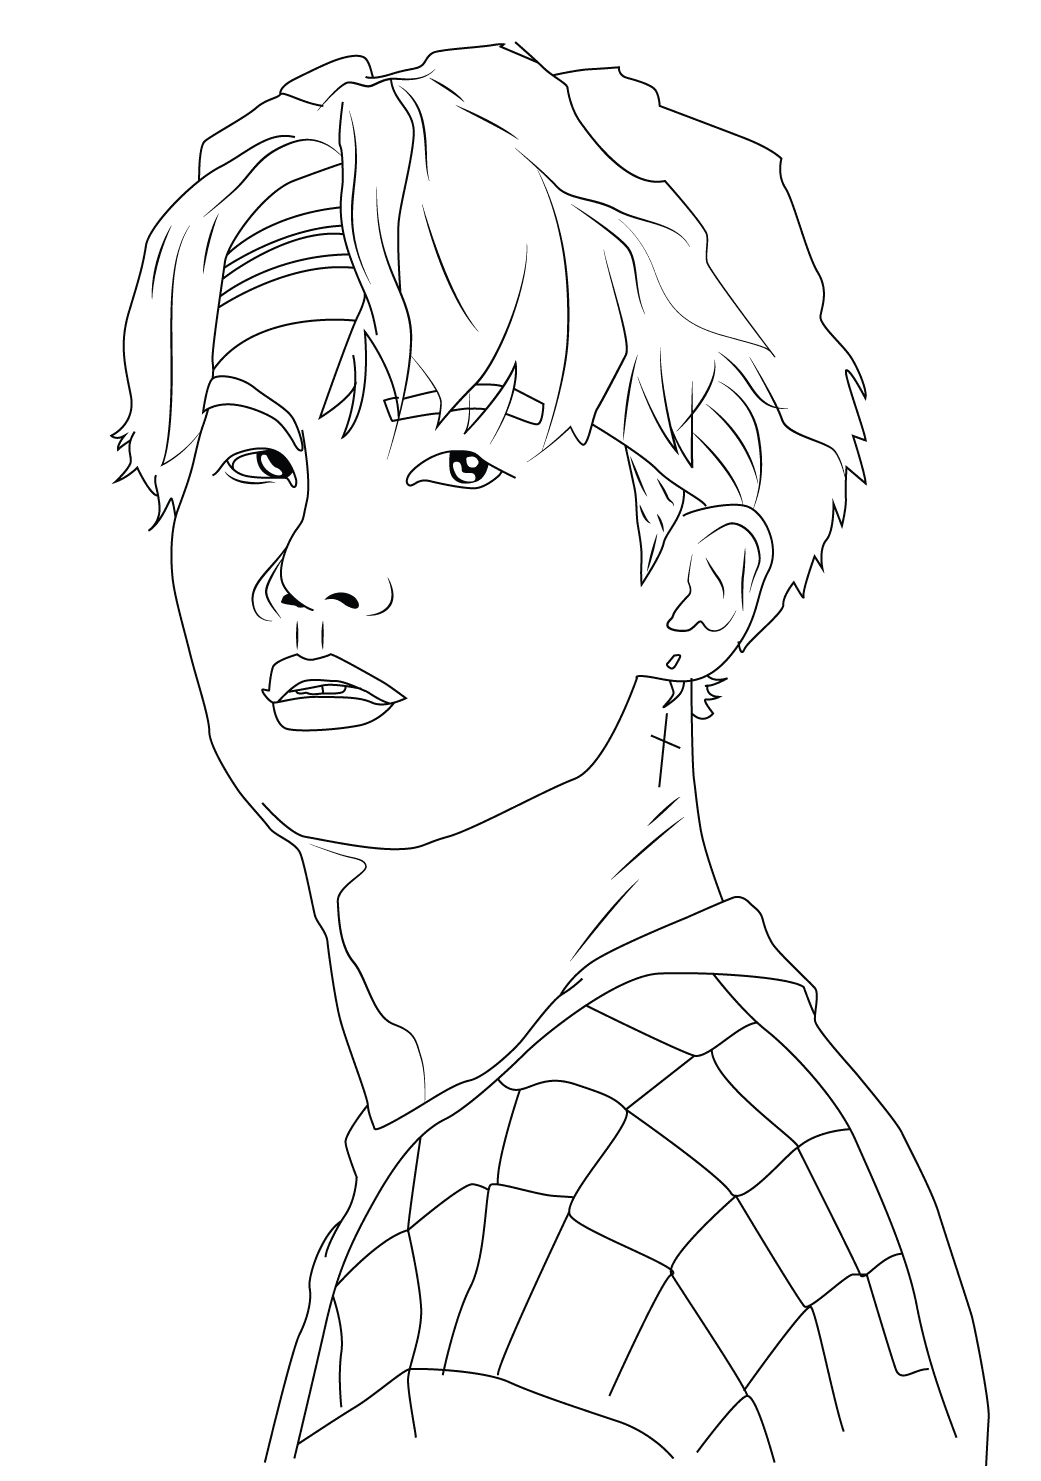 V from BTS Coloring Page